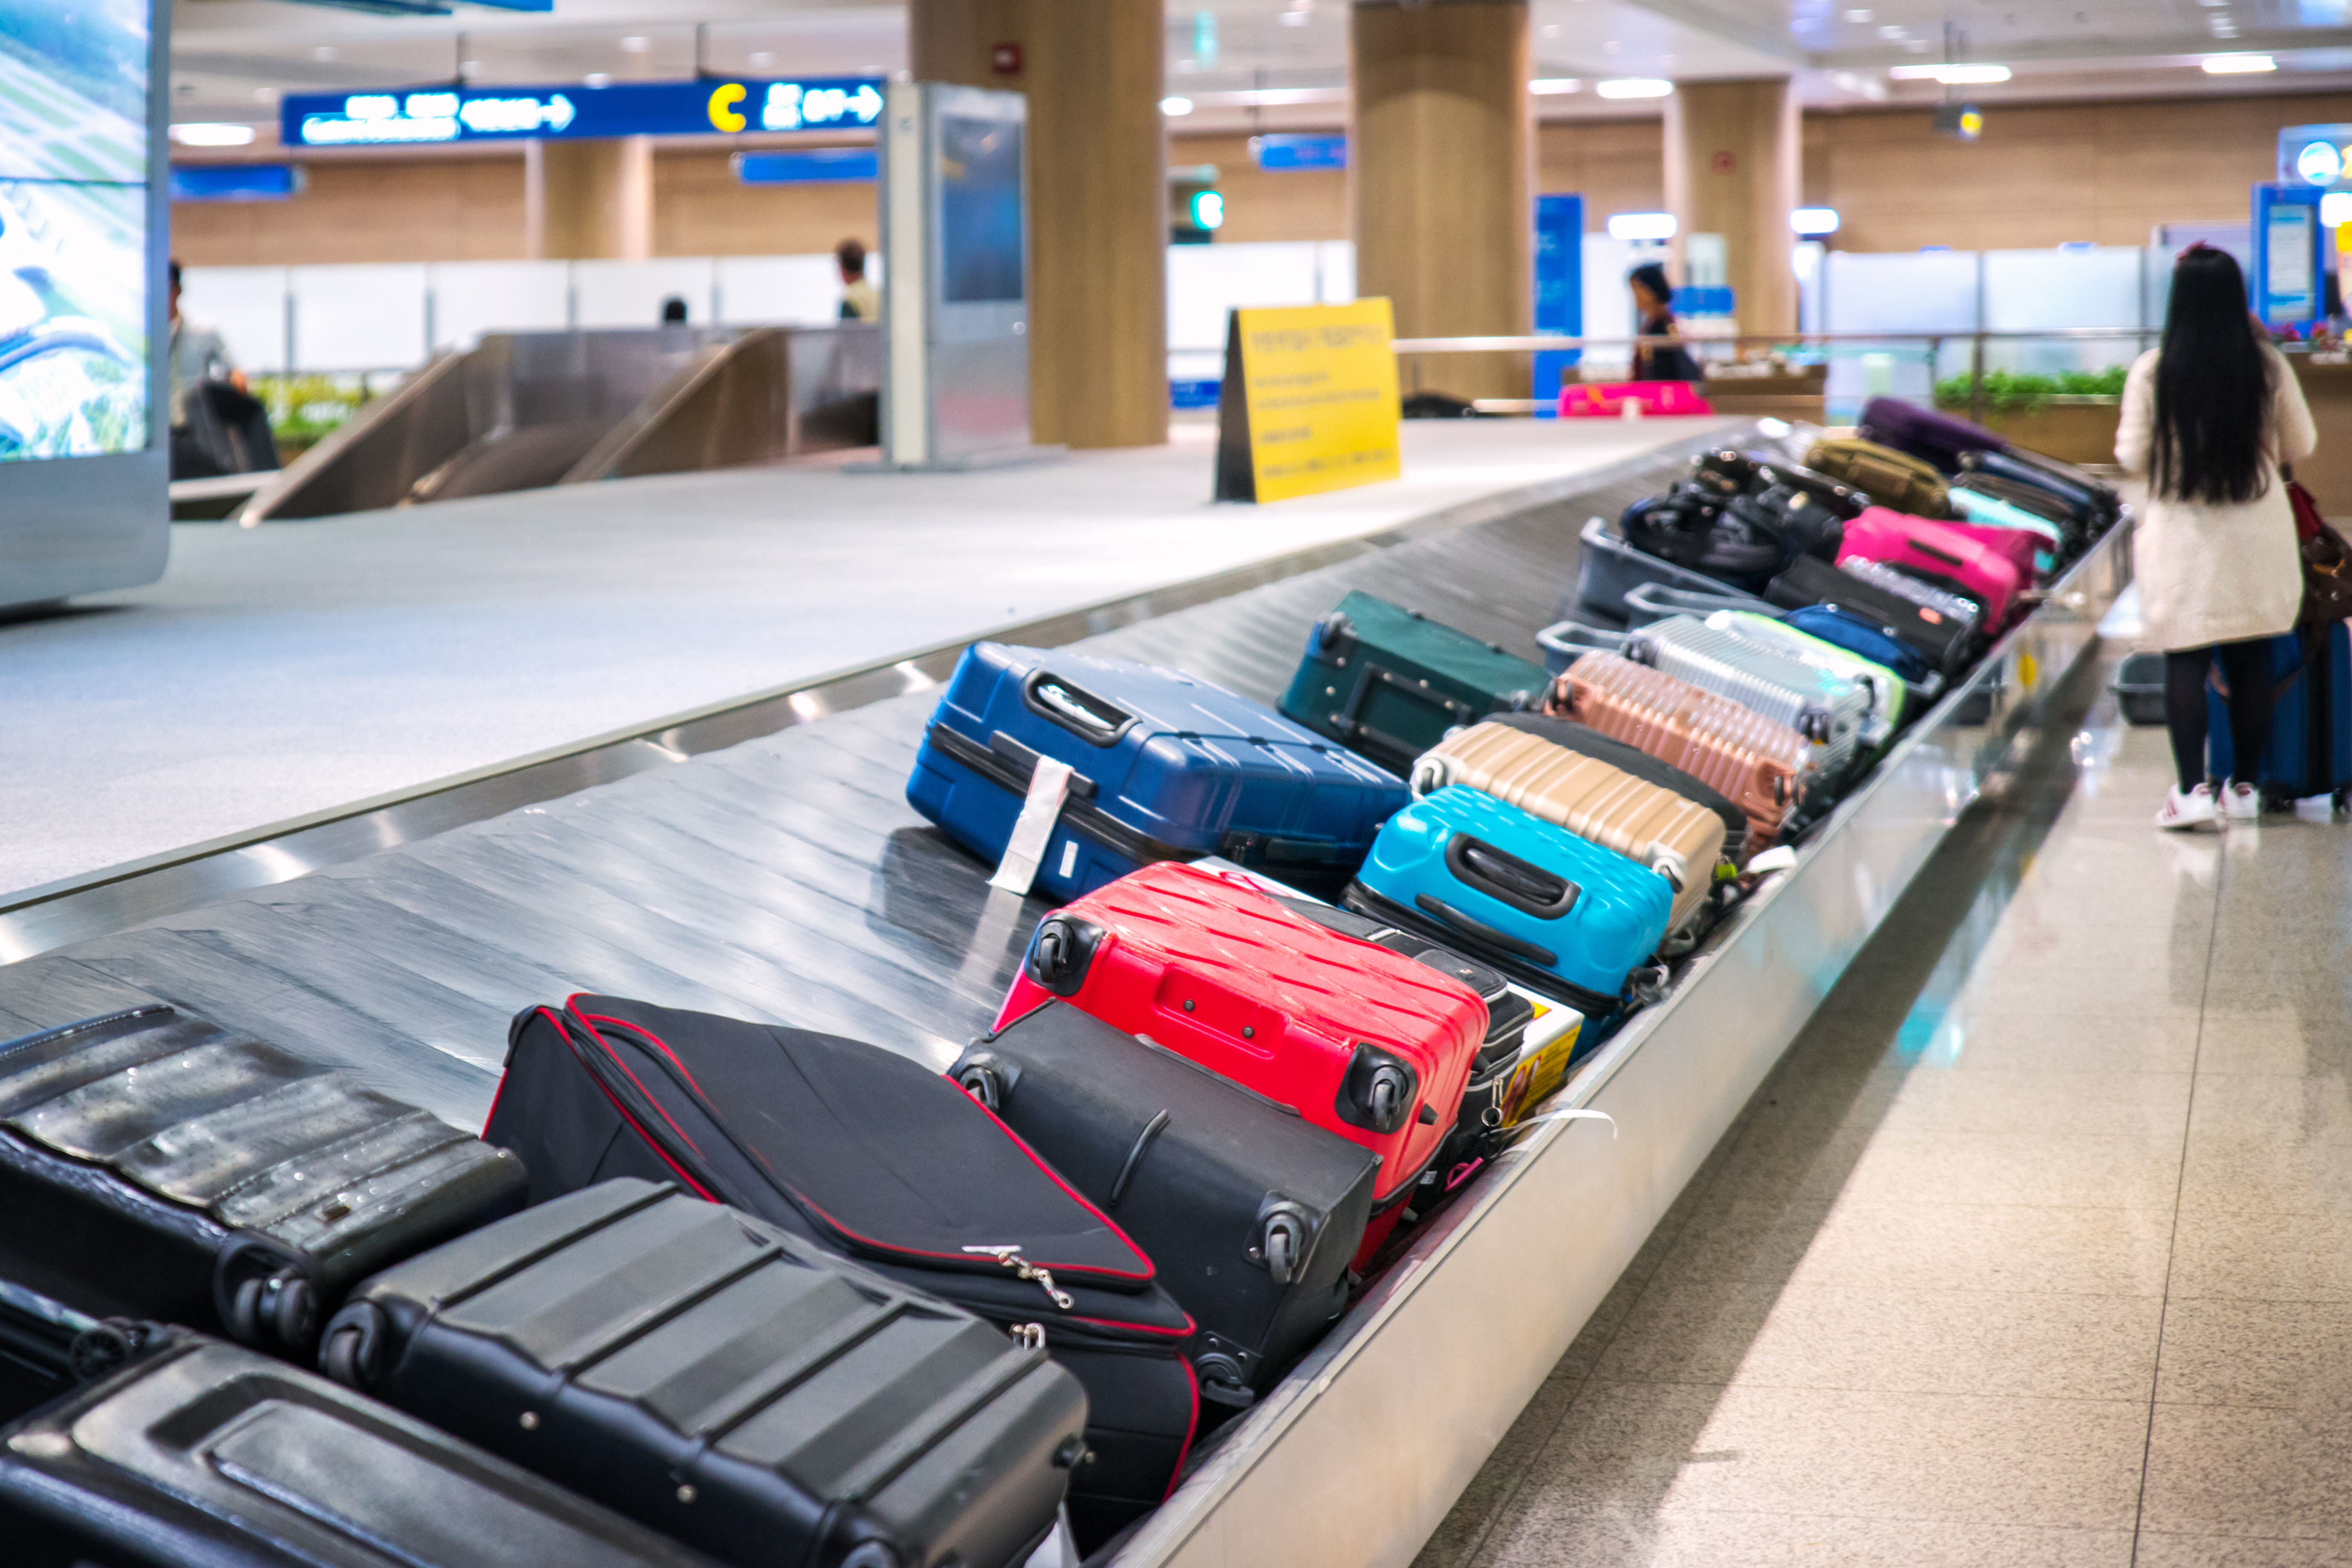 American Airlines has eliminated free checked bags on basic economy transpacific flights.